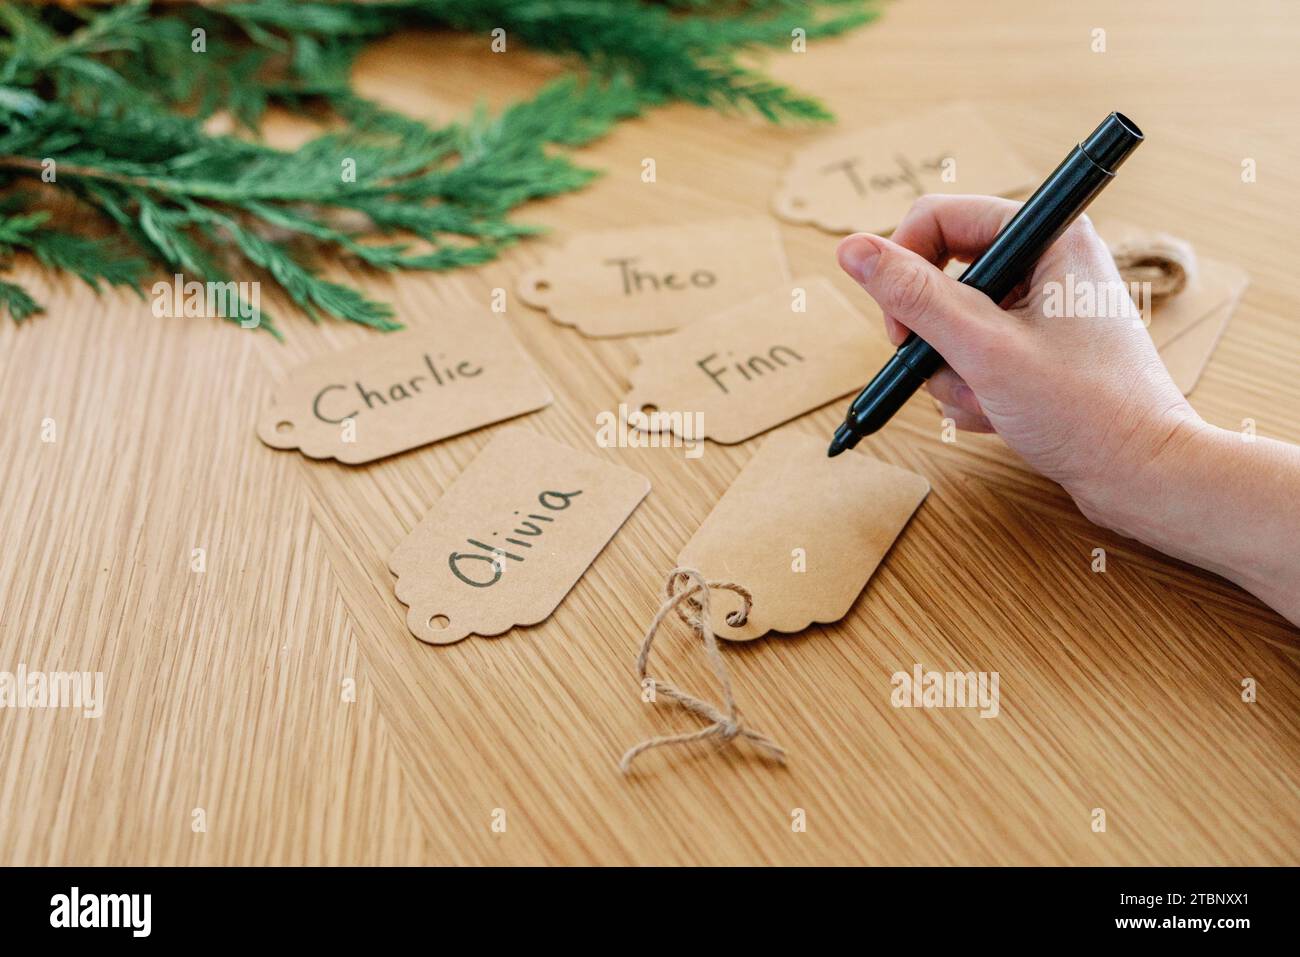 Handwriting names on holiday gift tags, one still blank Stock Photo